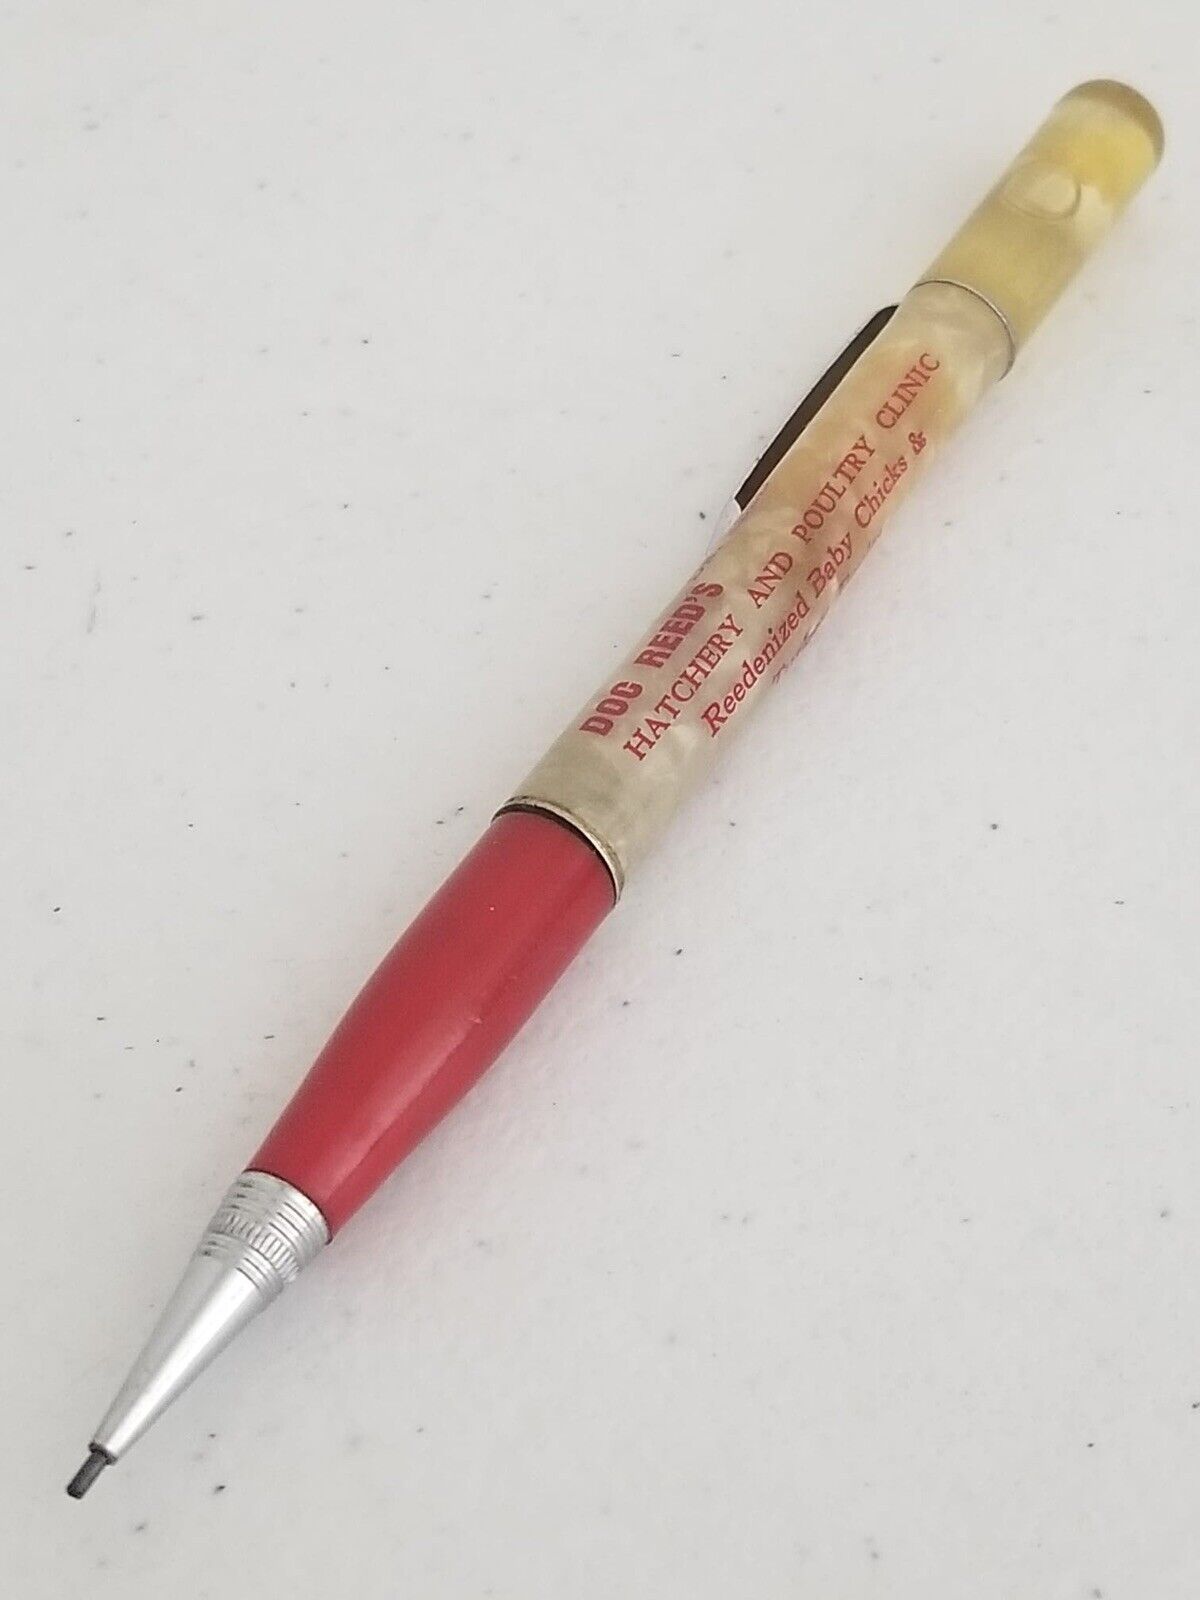 Rare Vintage Ritepoint Mechanical Pencil with Floating Chick - Doc Reed's Hatchery Advertising Memorabilia - TreasuTiques